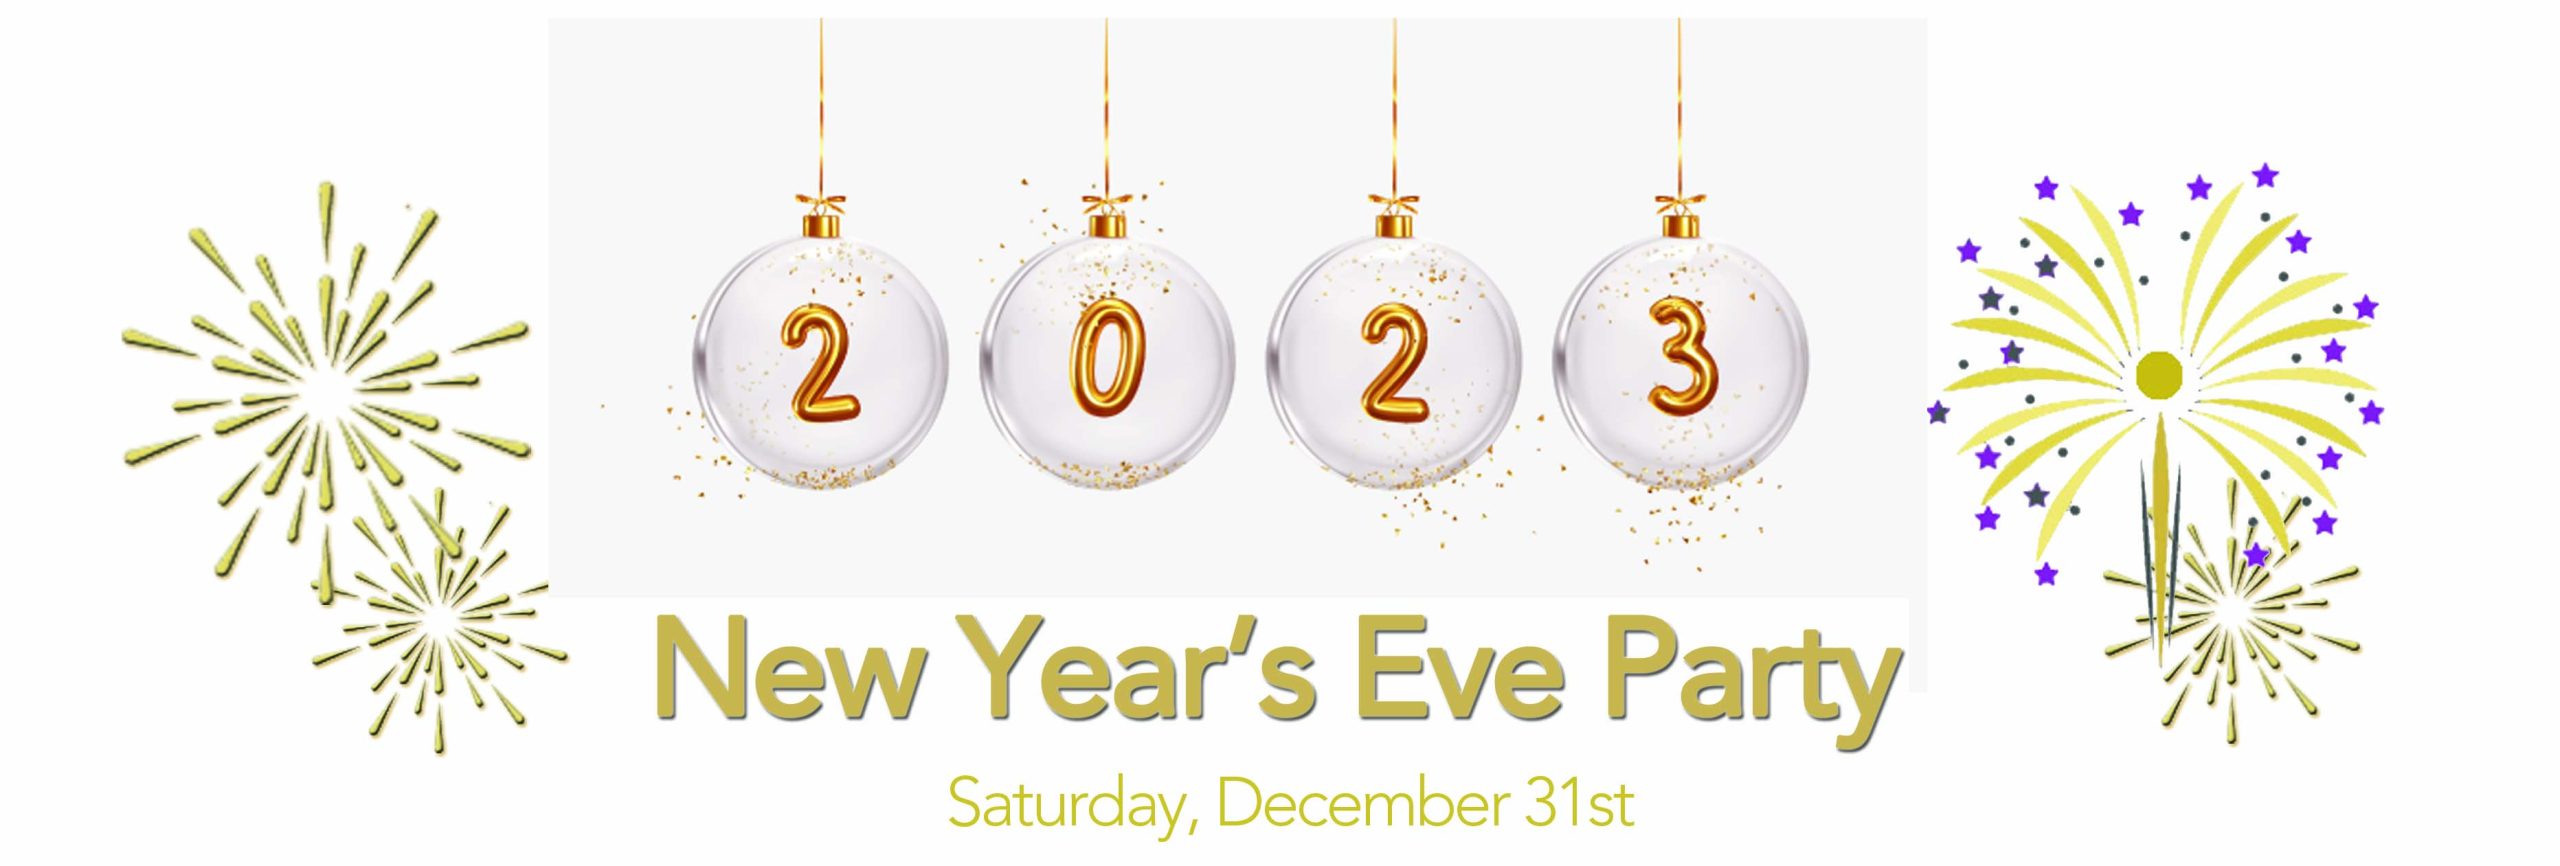 New-Years-Eve-Party-BCE-Second Image Under Header